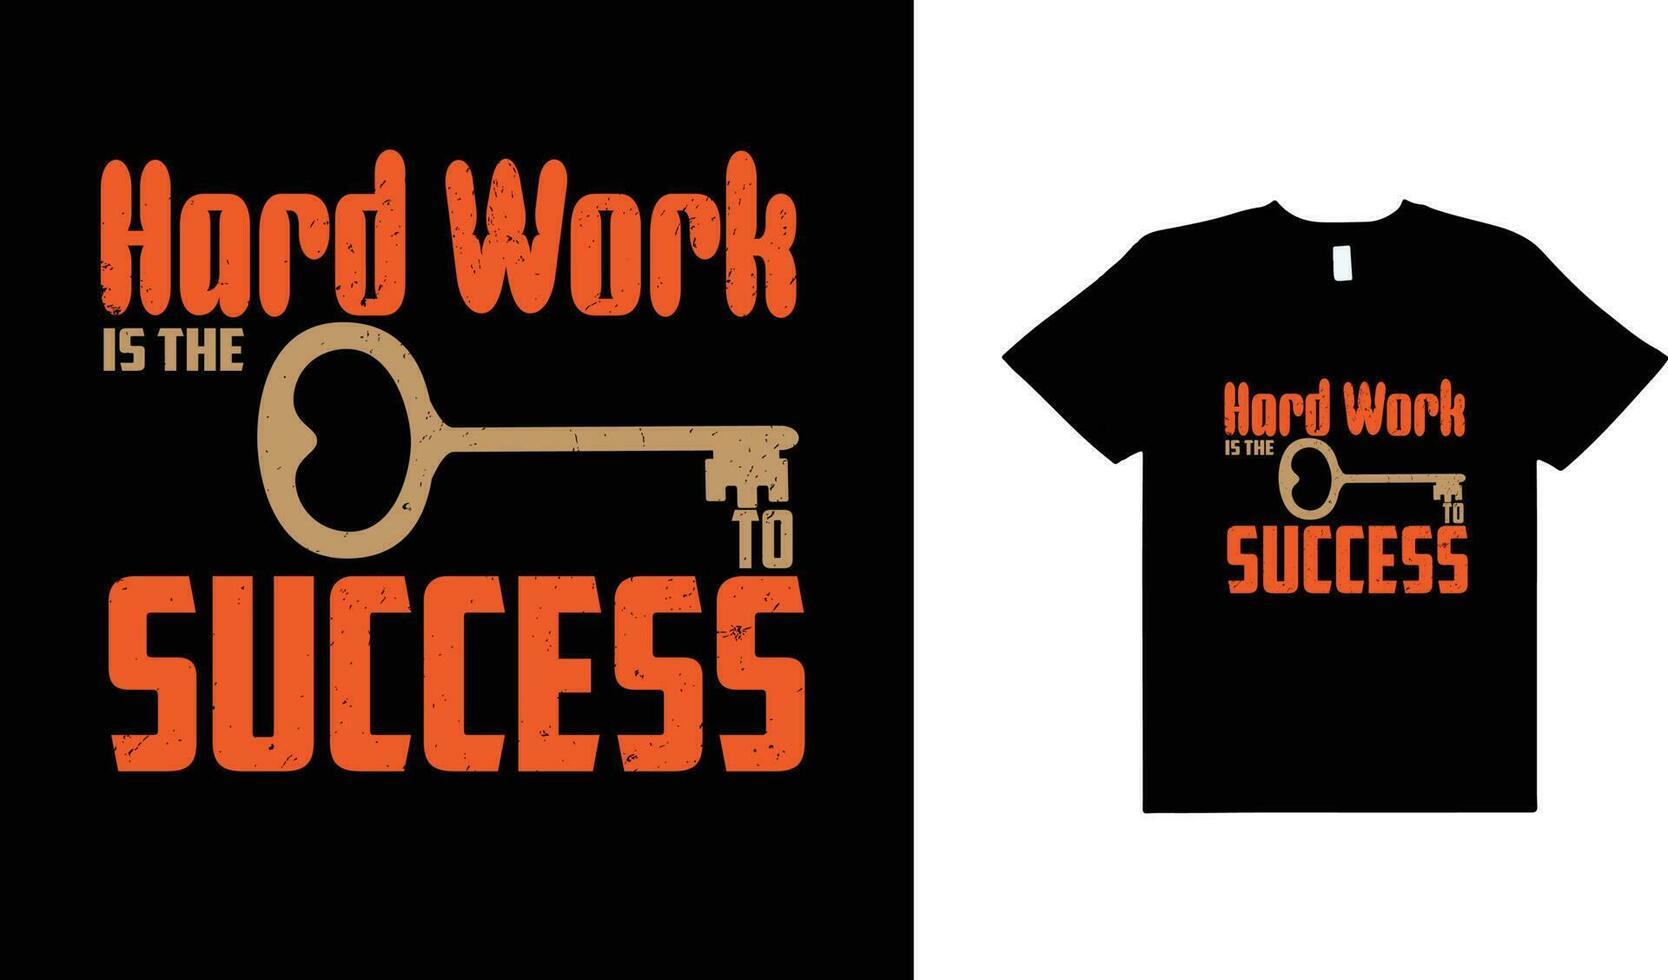 HARD WORK,TYPOGRAPHY GRAPHIC DESIGN,FOR T-SHIRT PRINTS,VECTOR ILLUSTRATION. vector